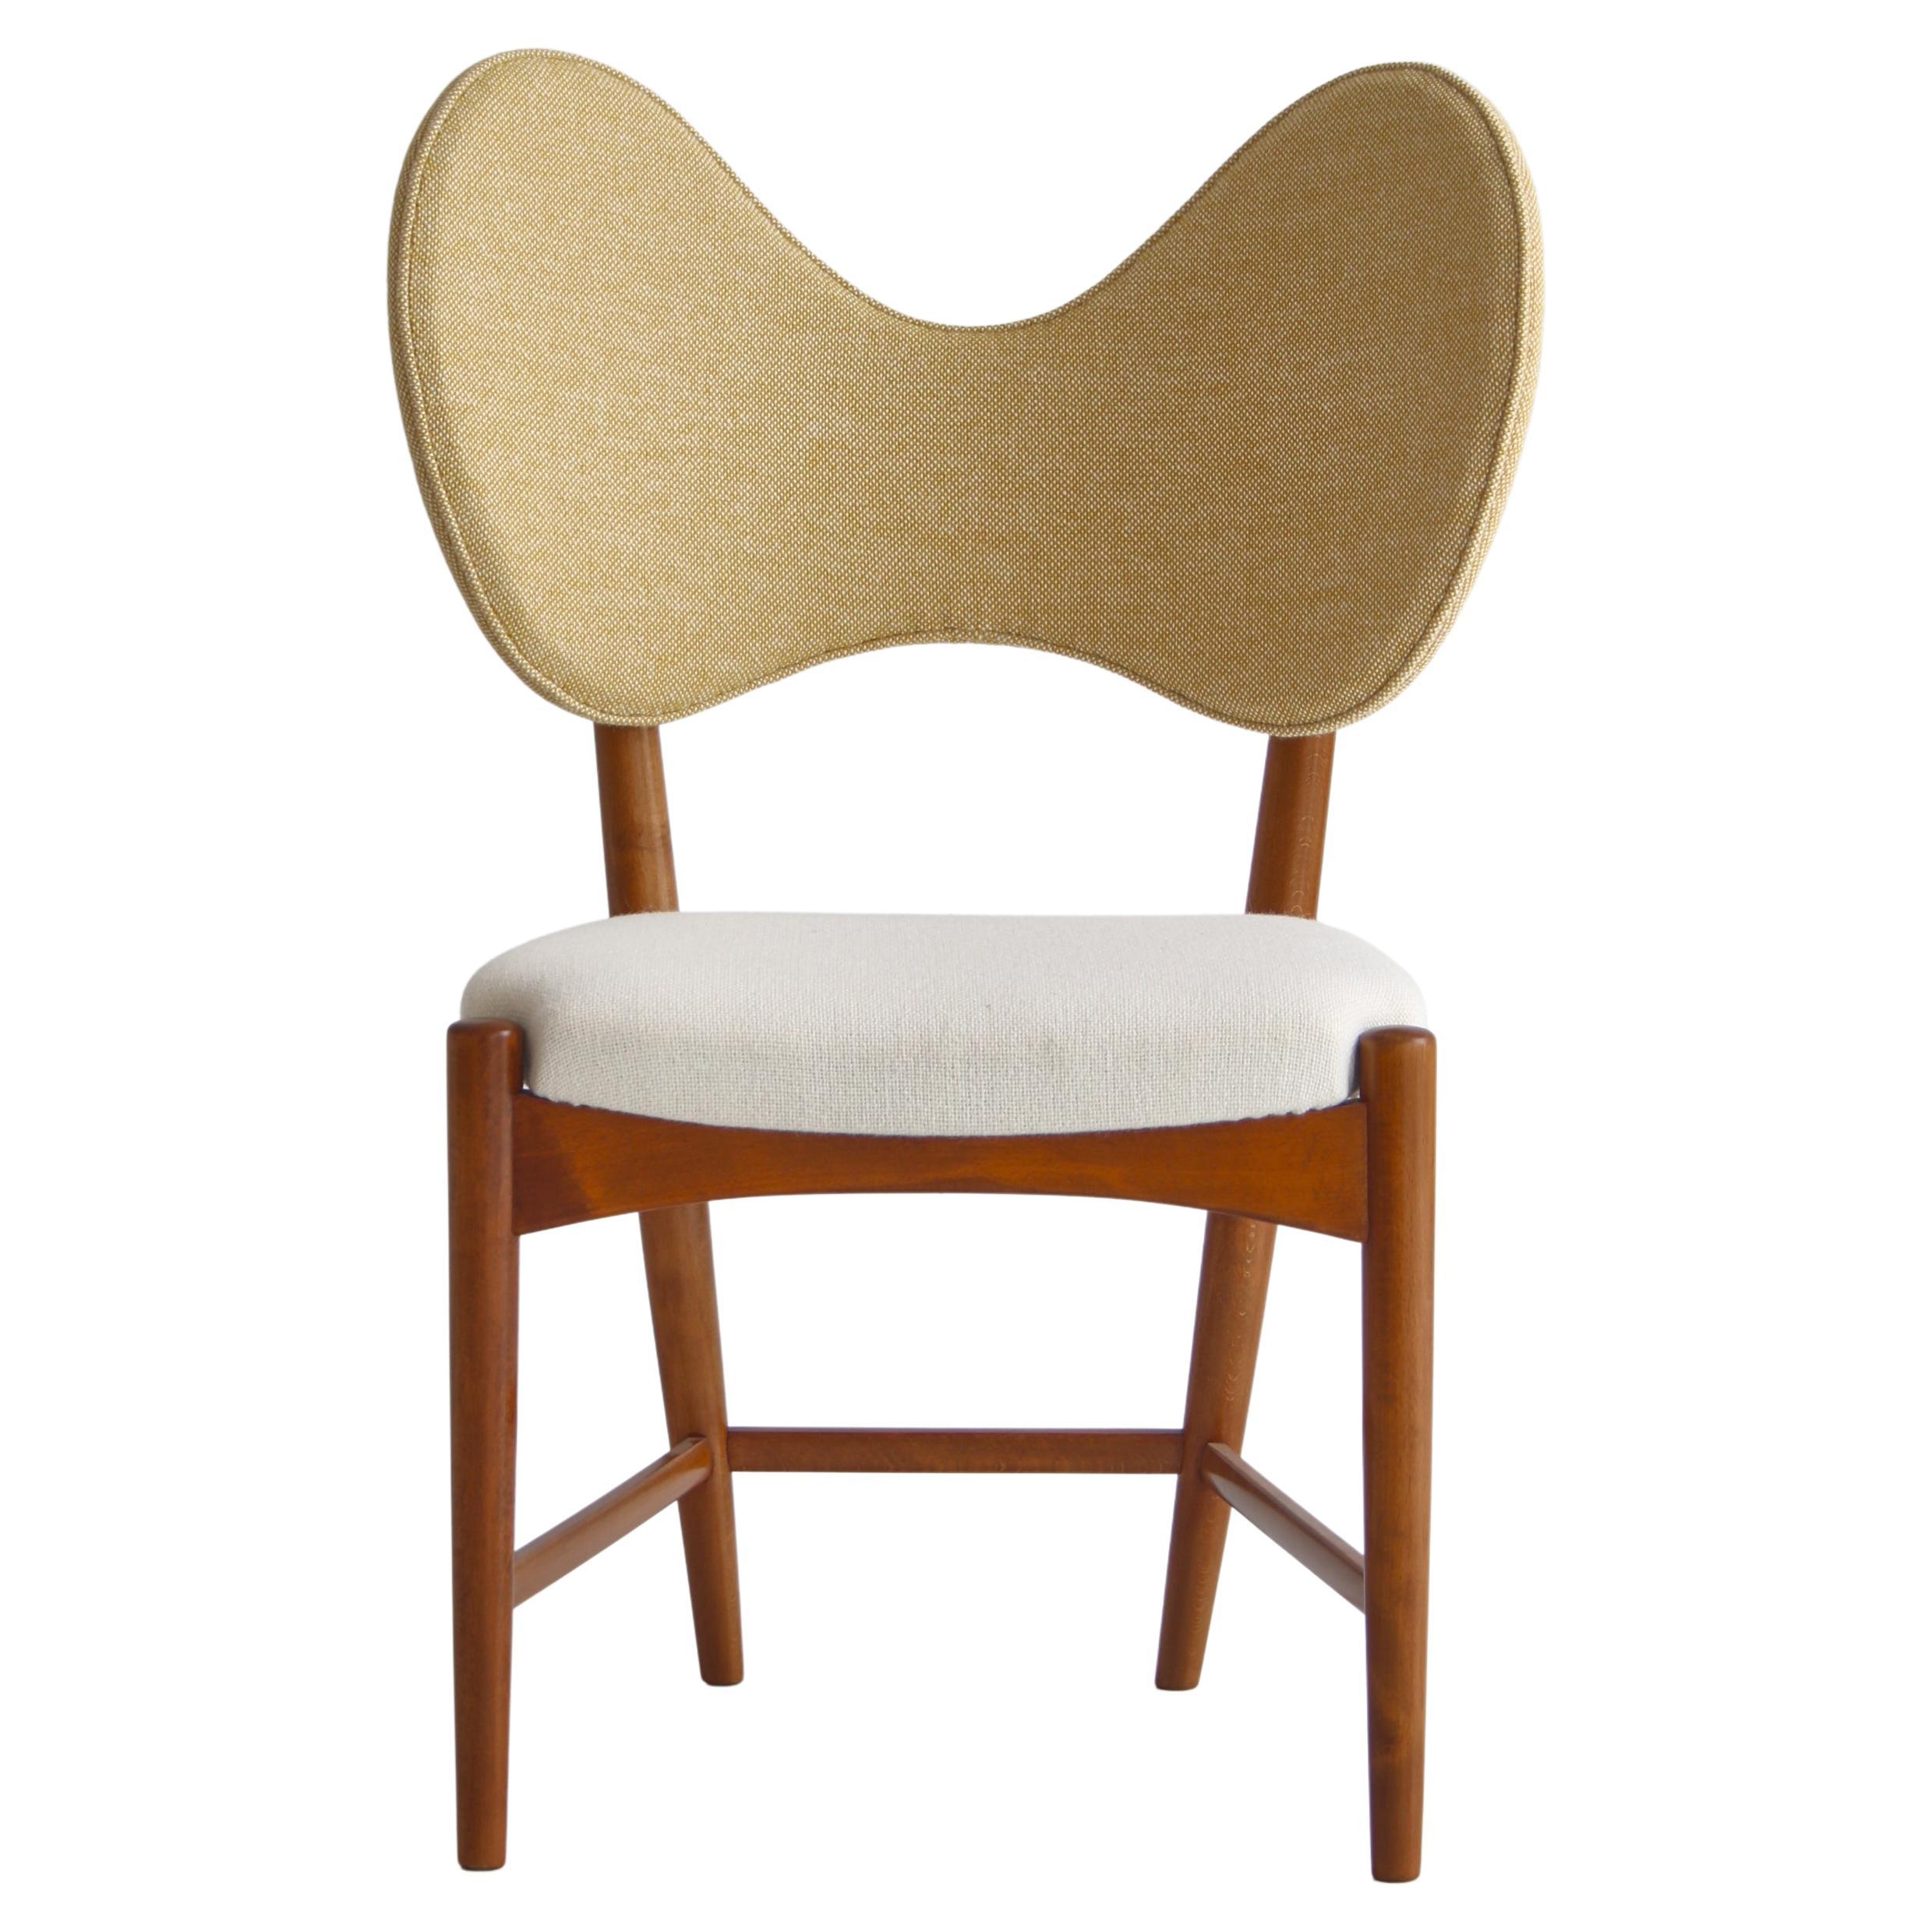 Sculptural "Butterfly" Chair by Eva & Nils Koppel, Danish Modern, 1950s For Sale